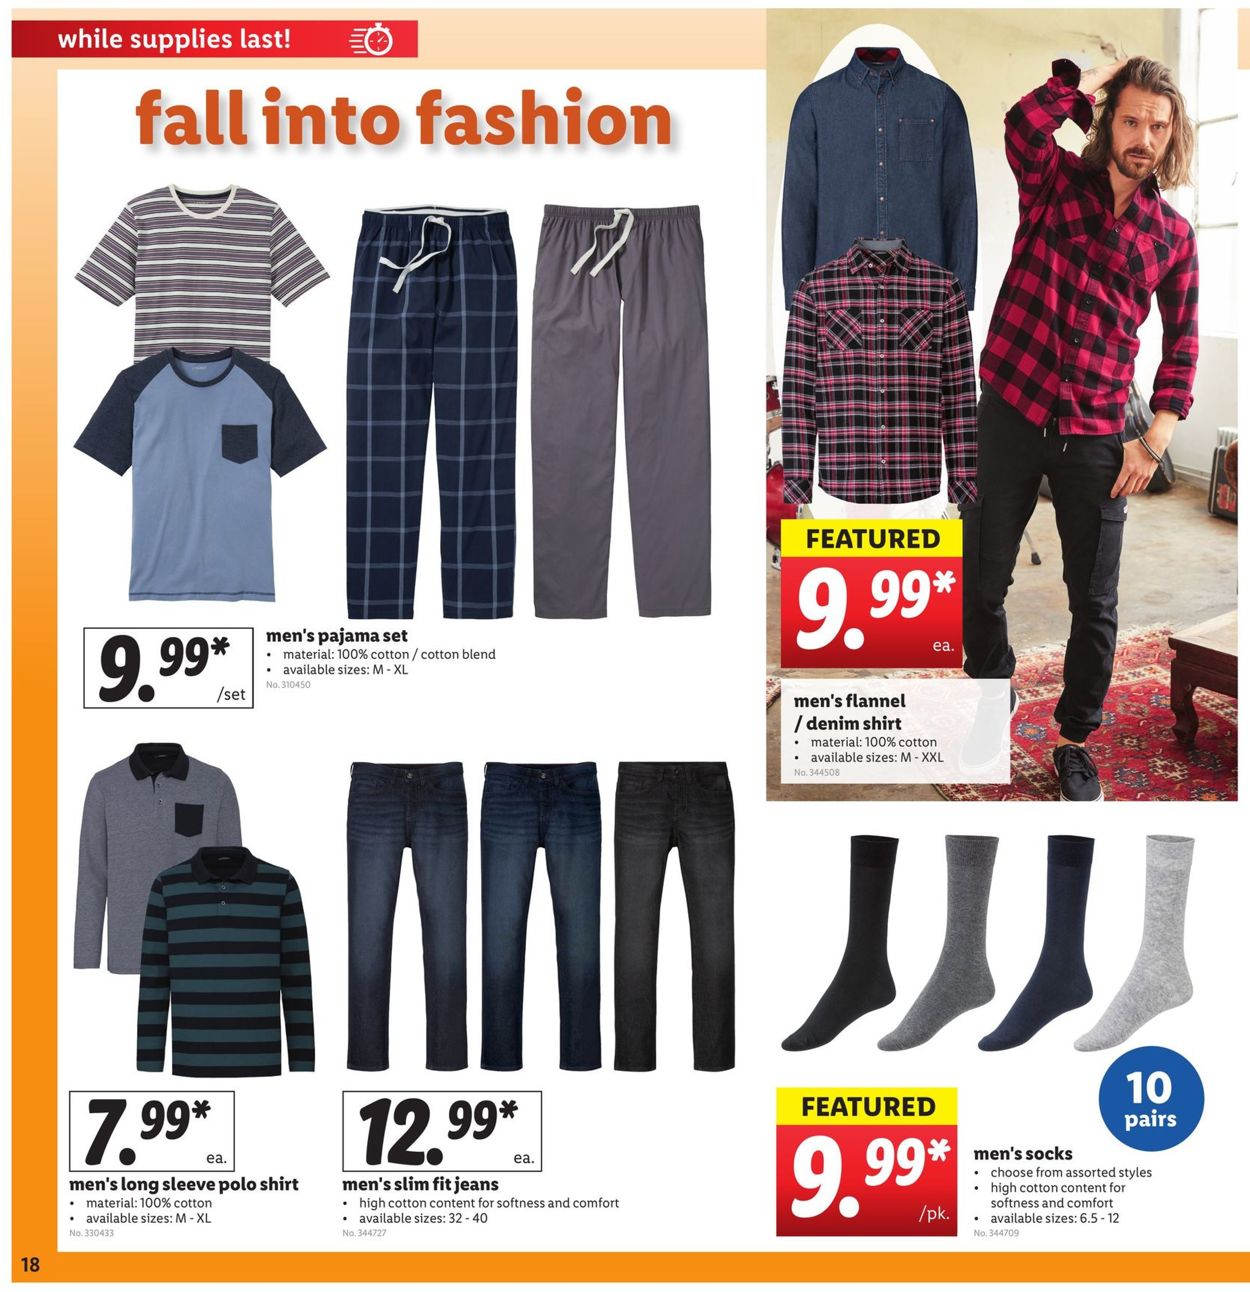 Catalogue Lidl from 09/02/2020